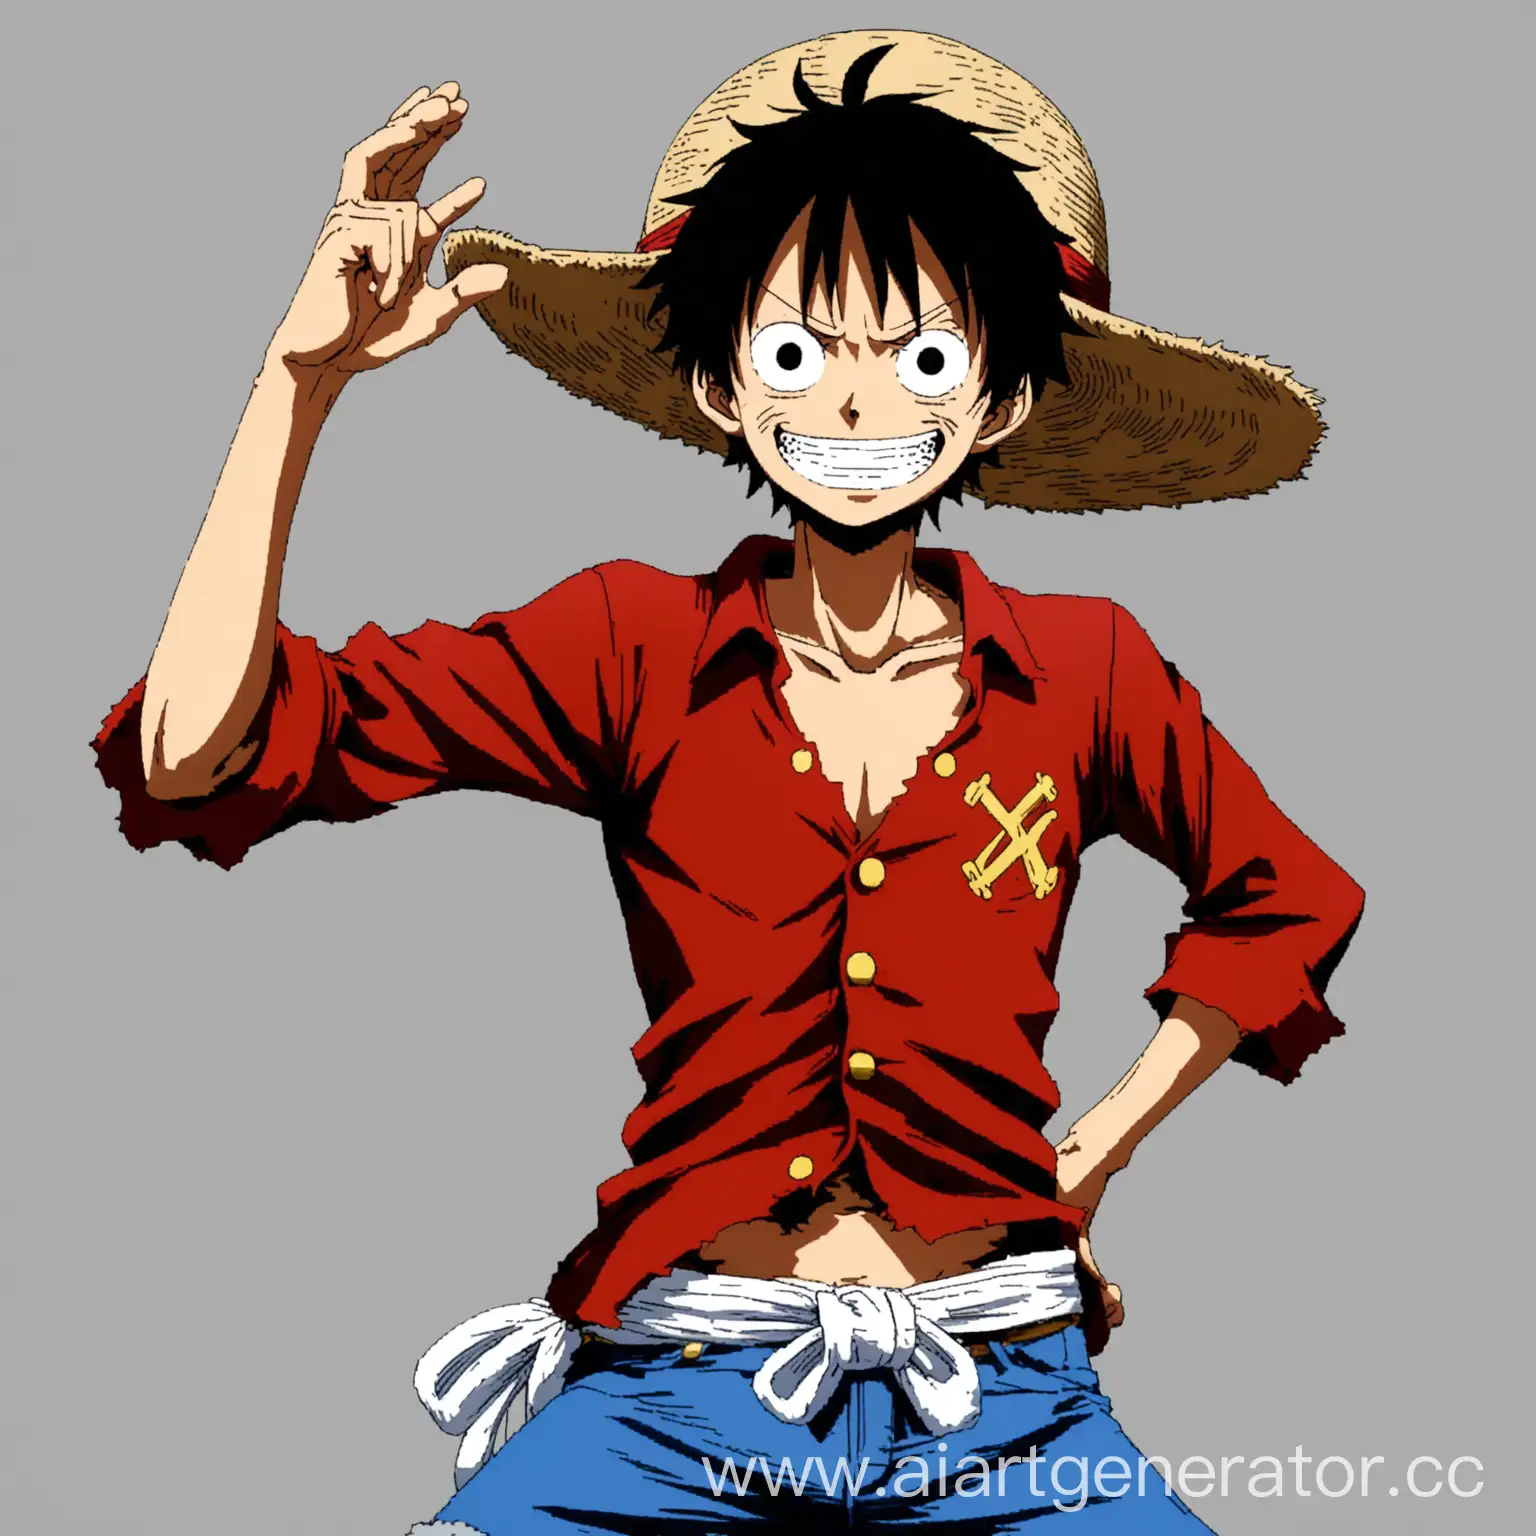 Colorful-Portrait-of-Monkey-D-Luffy-from-One-Piece-Anime-Series